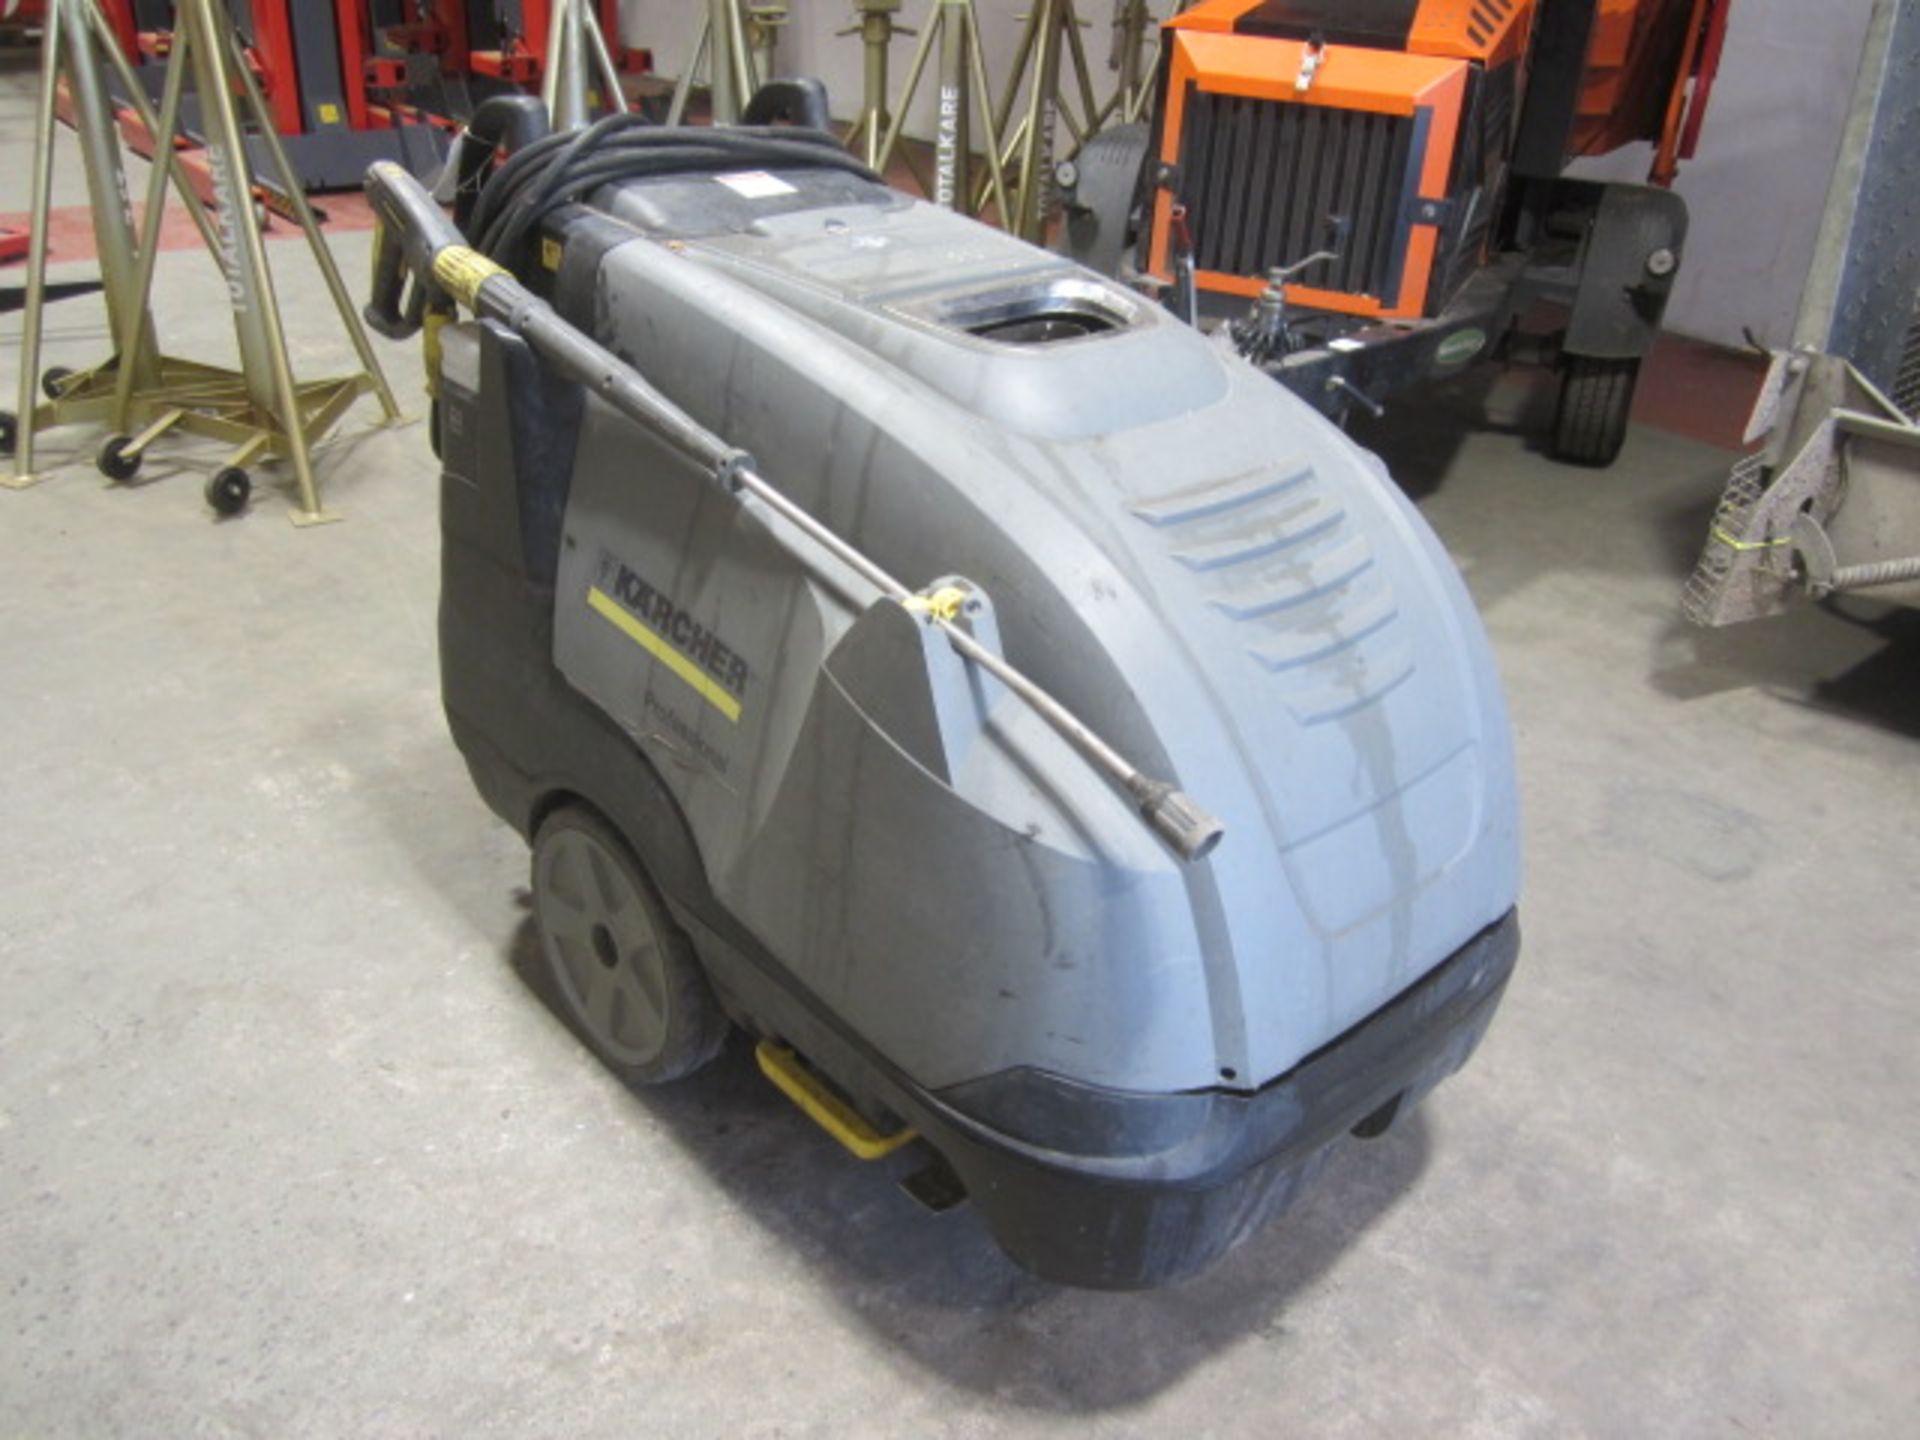 Karcher Professional HDS 10/20-4M commercial diesel pressure washer with lance